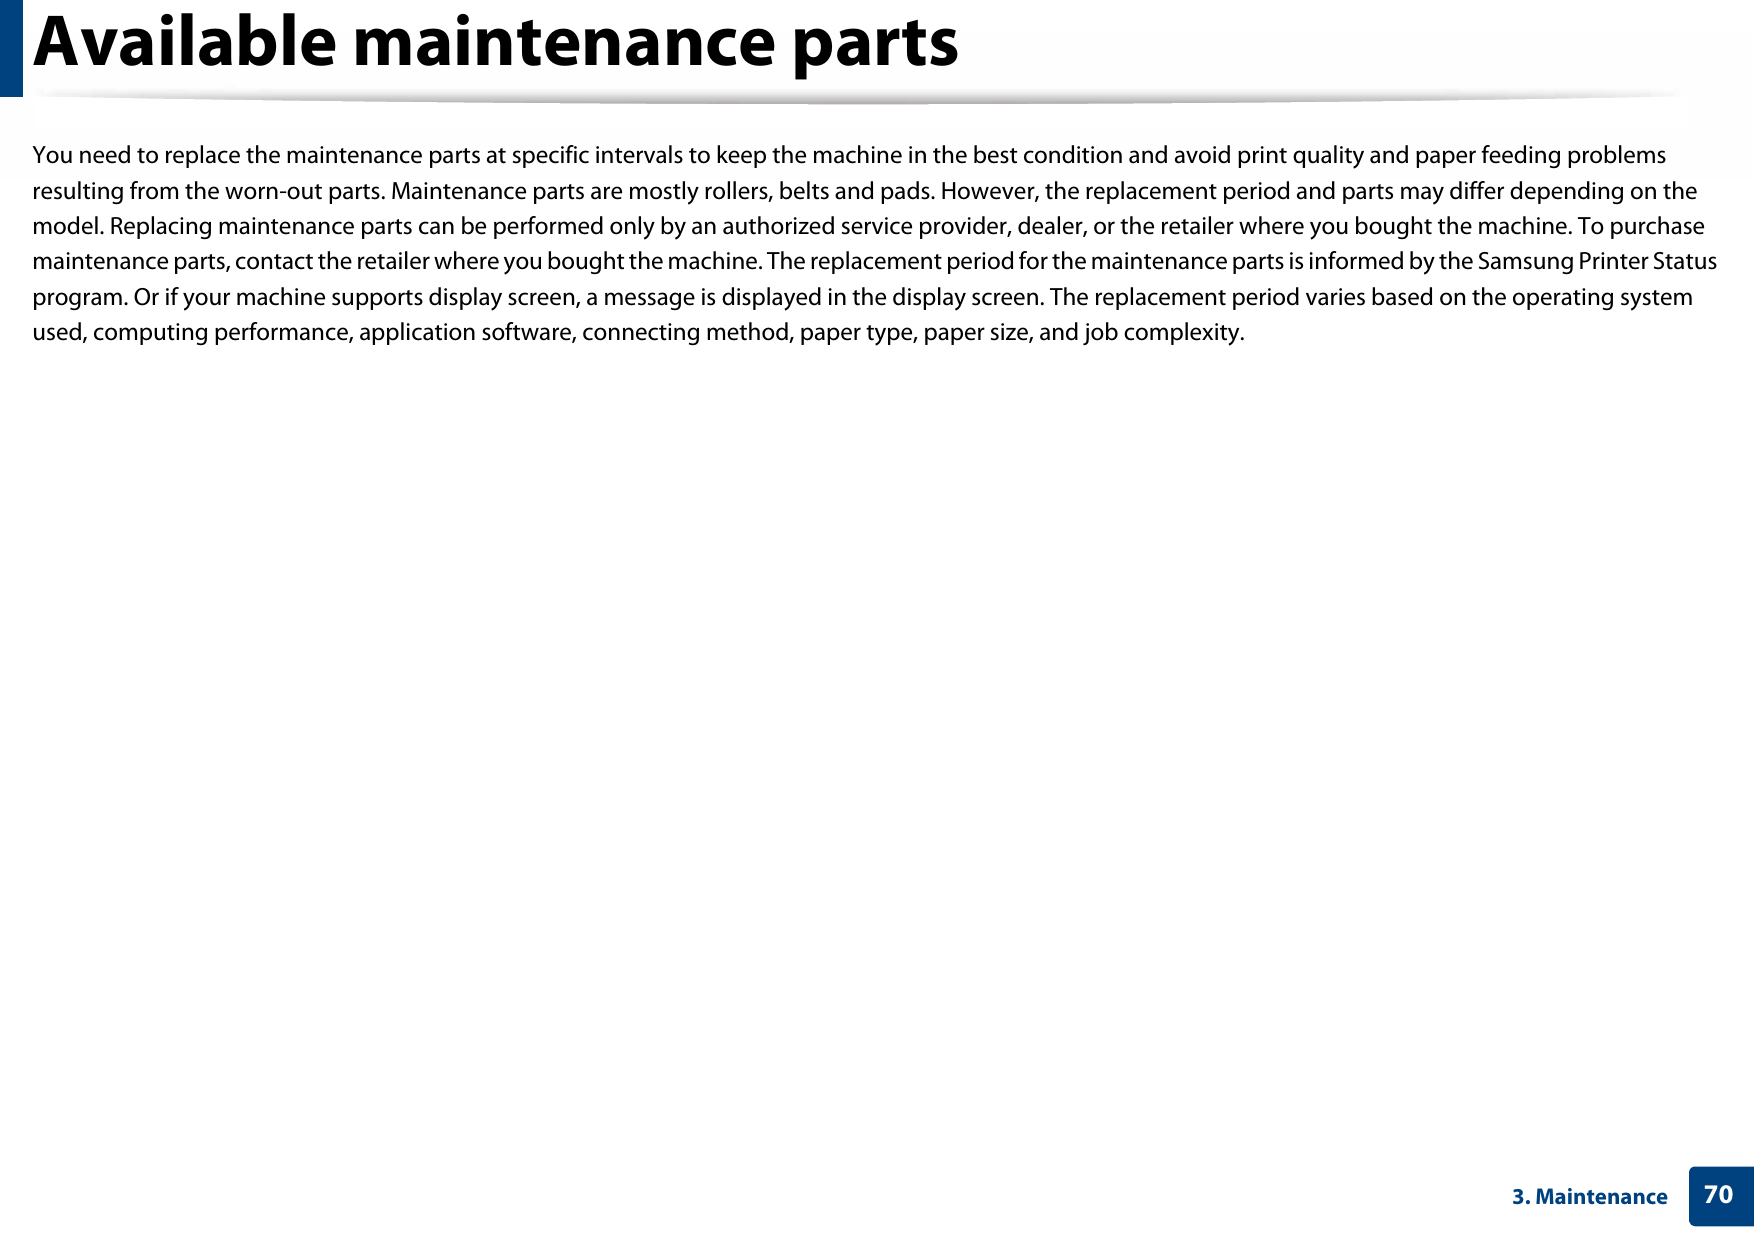 703. MaintenanceAvailable maintenance partsYou need to replace the maintenance parts at specific intervals to keep the machine in the best condition and avoid print quality and paper feeding problems resulting from the worn-out parts. Maintenance parts are mostly rollers, belts and pads. However, the replacement period and parts may differ depending on the model. Replacing maintenance parts can be performed only by an authorized service provider, dealer, or the retailer where you bought the machine. To purchase maintenance parts, contact the retailer where you bought the machine. The replacement period for the maintenance parts is informed by the Samsung Printer Status program. Or if your machine supports display screen, a message is displayed in the display screen. The replacement period varies based on the operating system used, computing performance, application software, connecting method, paper type, paper size, and job complexity.